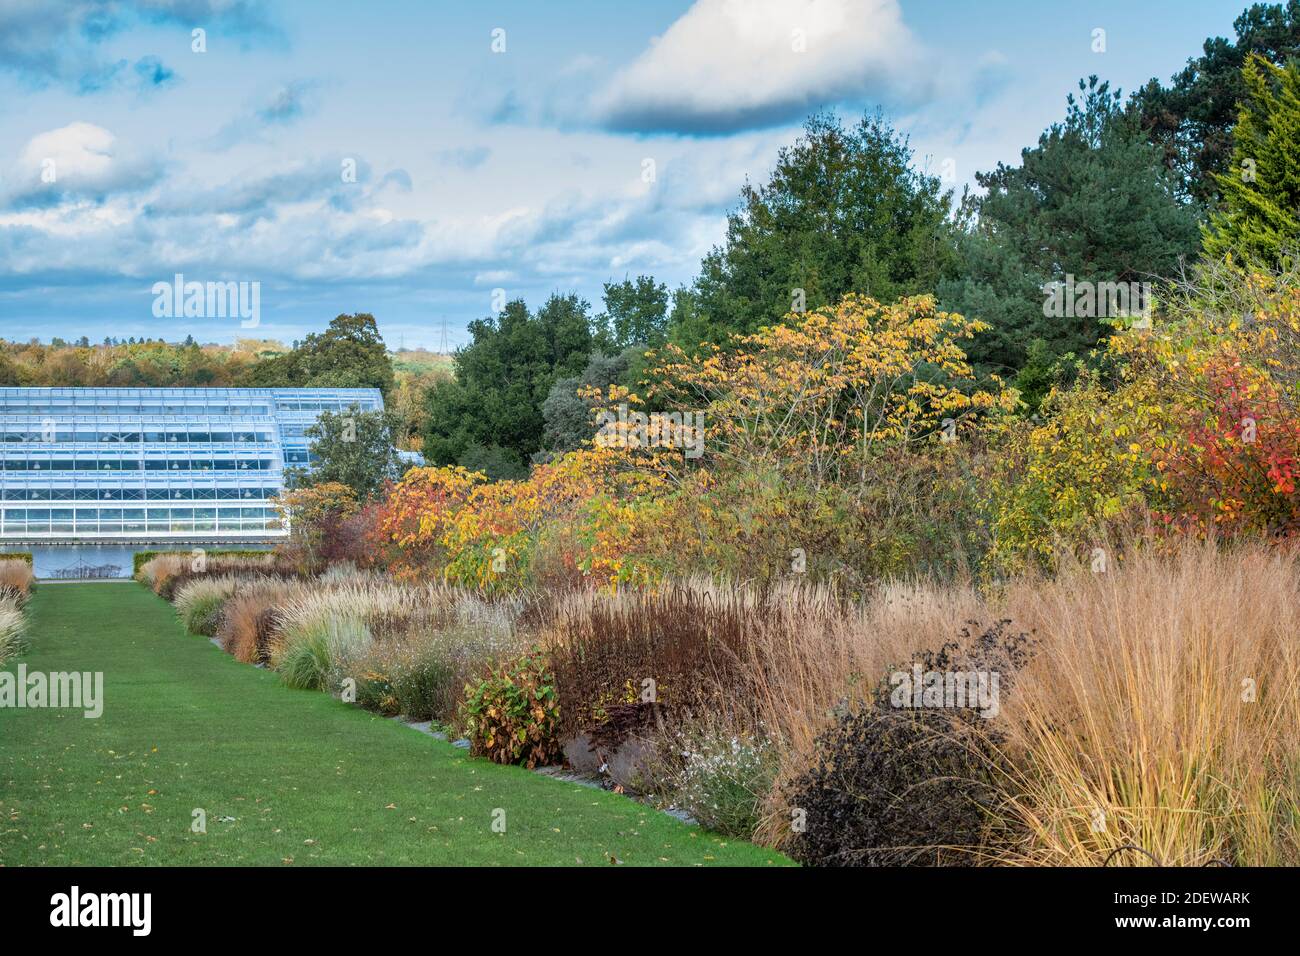 Glasshouse and garden borders at RHS Wisley in autumn. Surrey, England Stock Photo